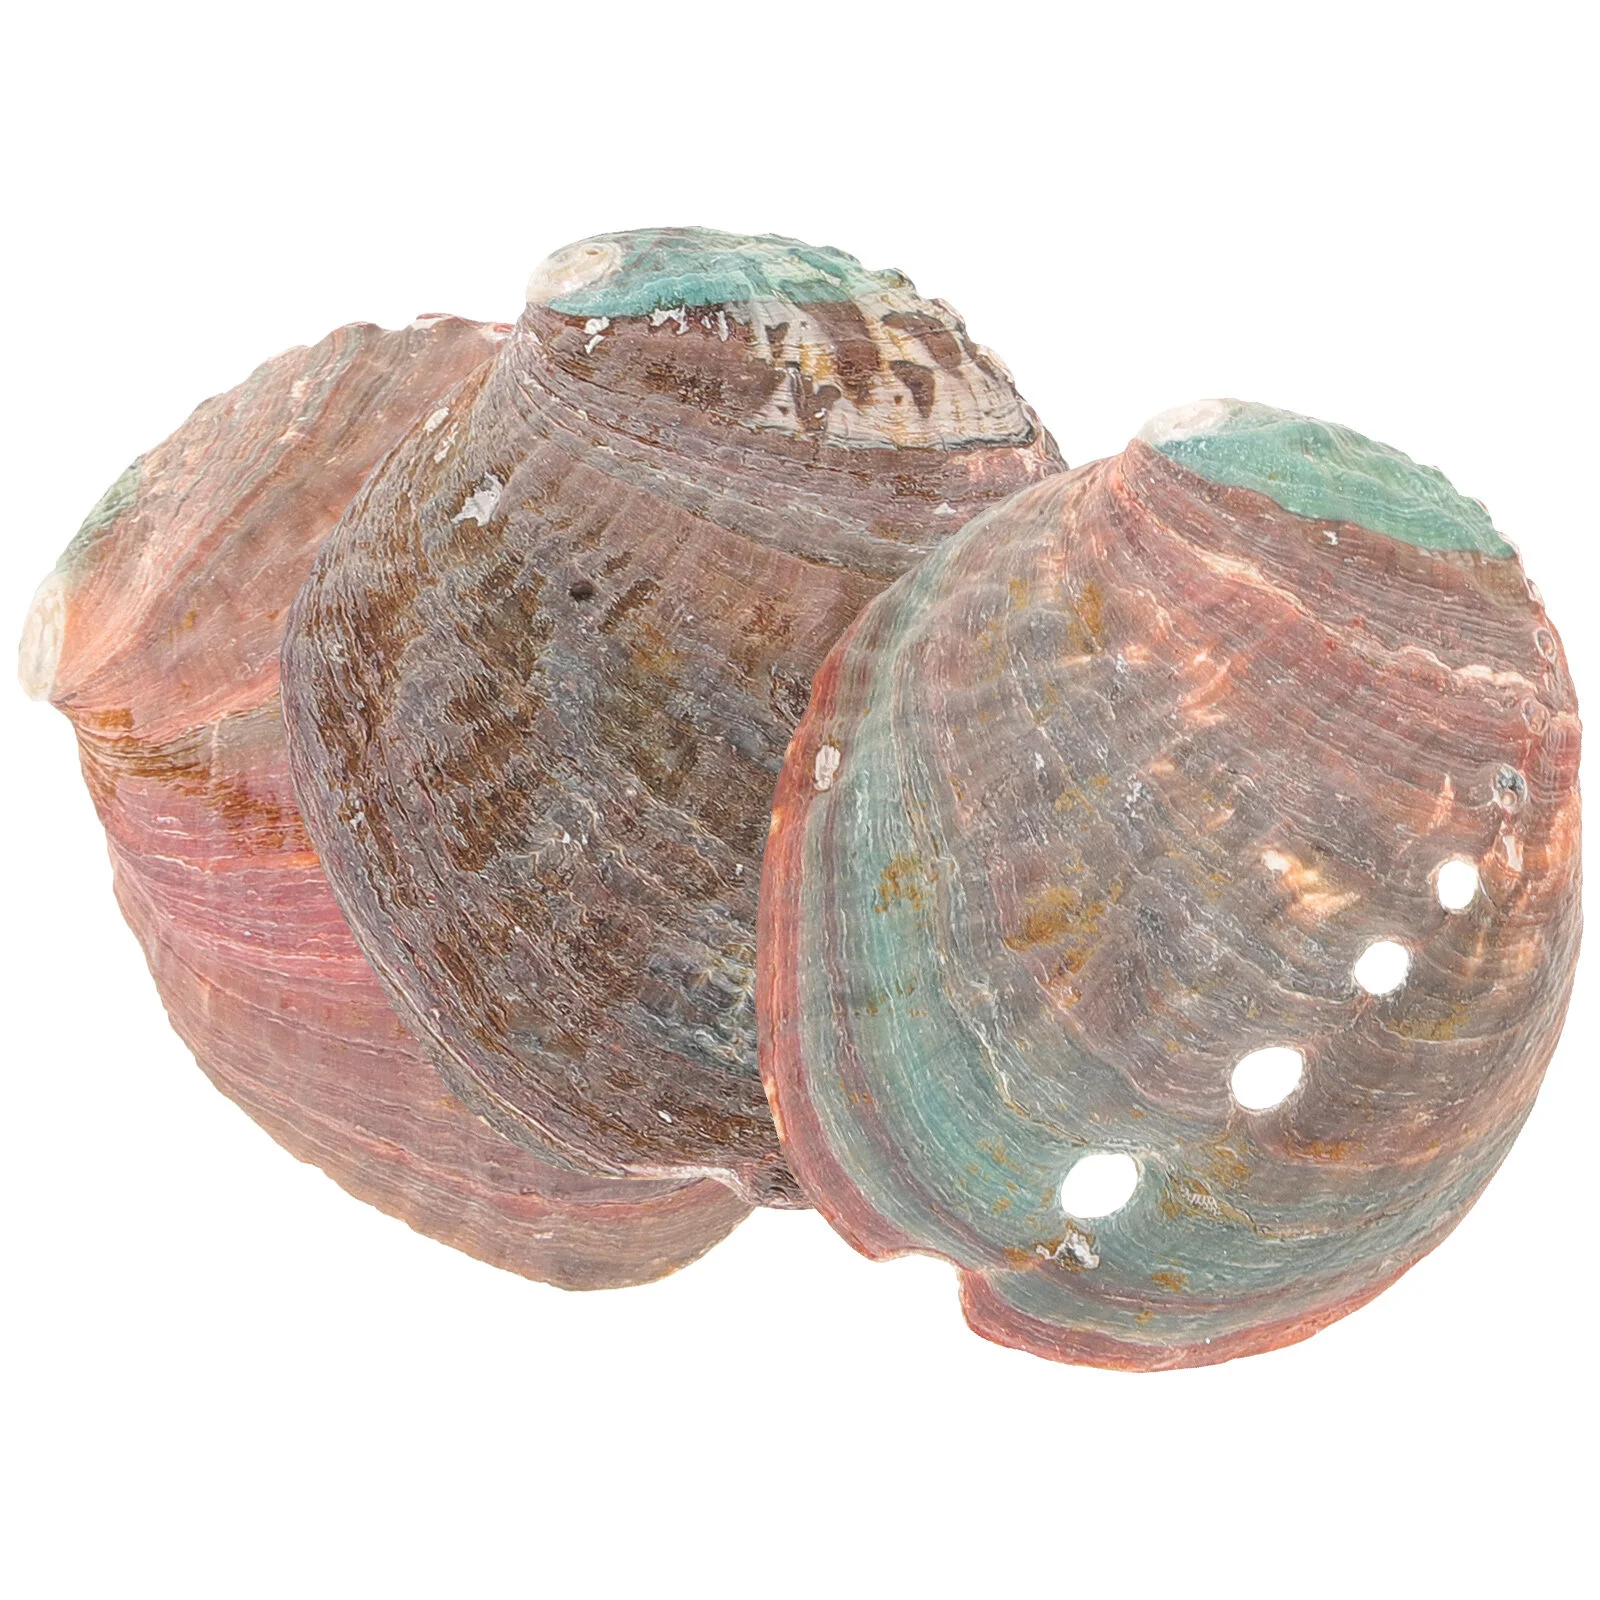 

3 Pcs Abalone Shell Smudging Smudge Bowl Stick Holder Fish Tank Kit Suite Offering Natural Decor